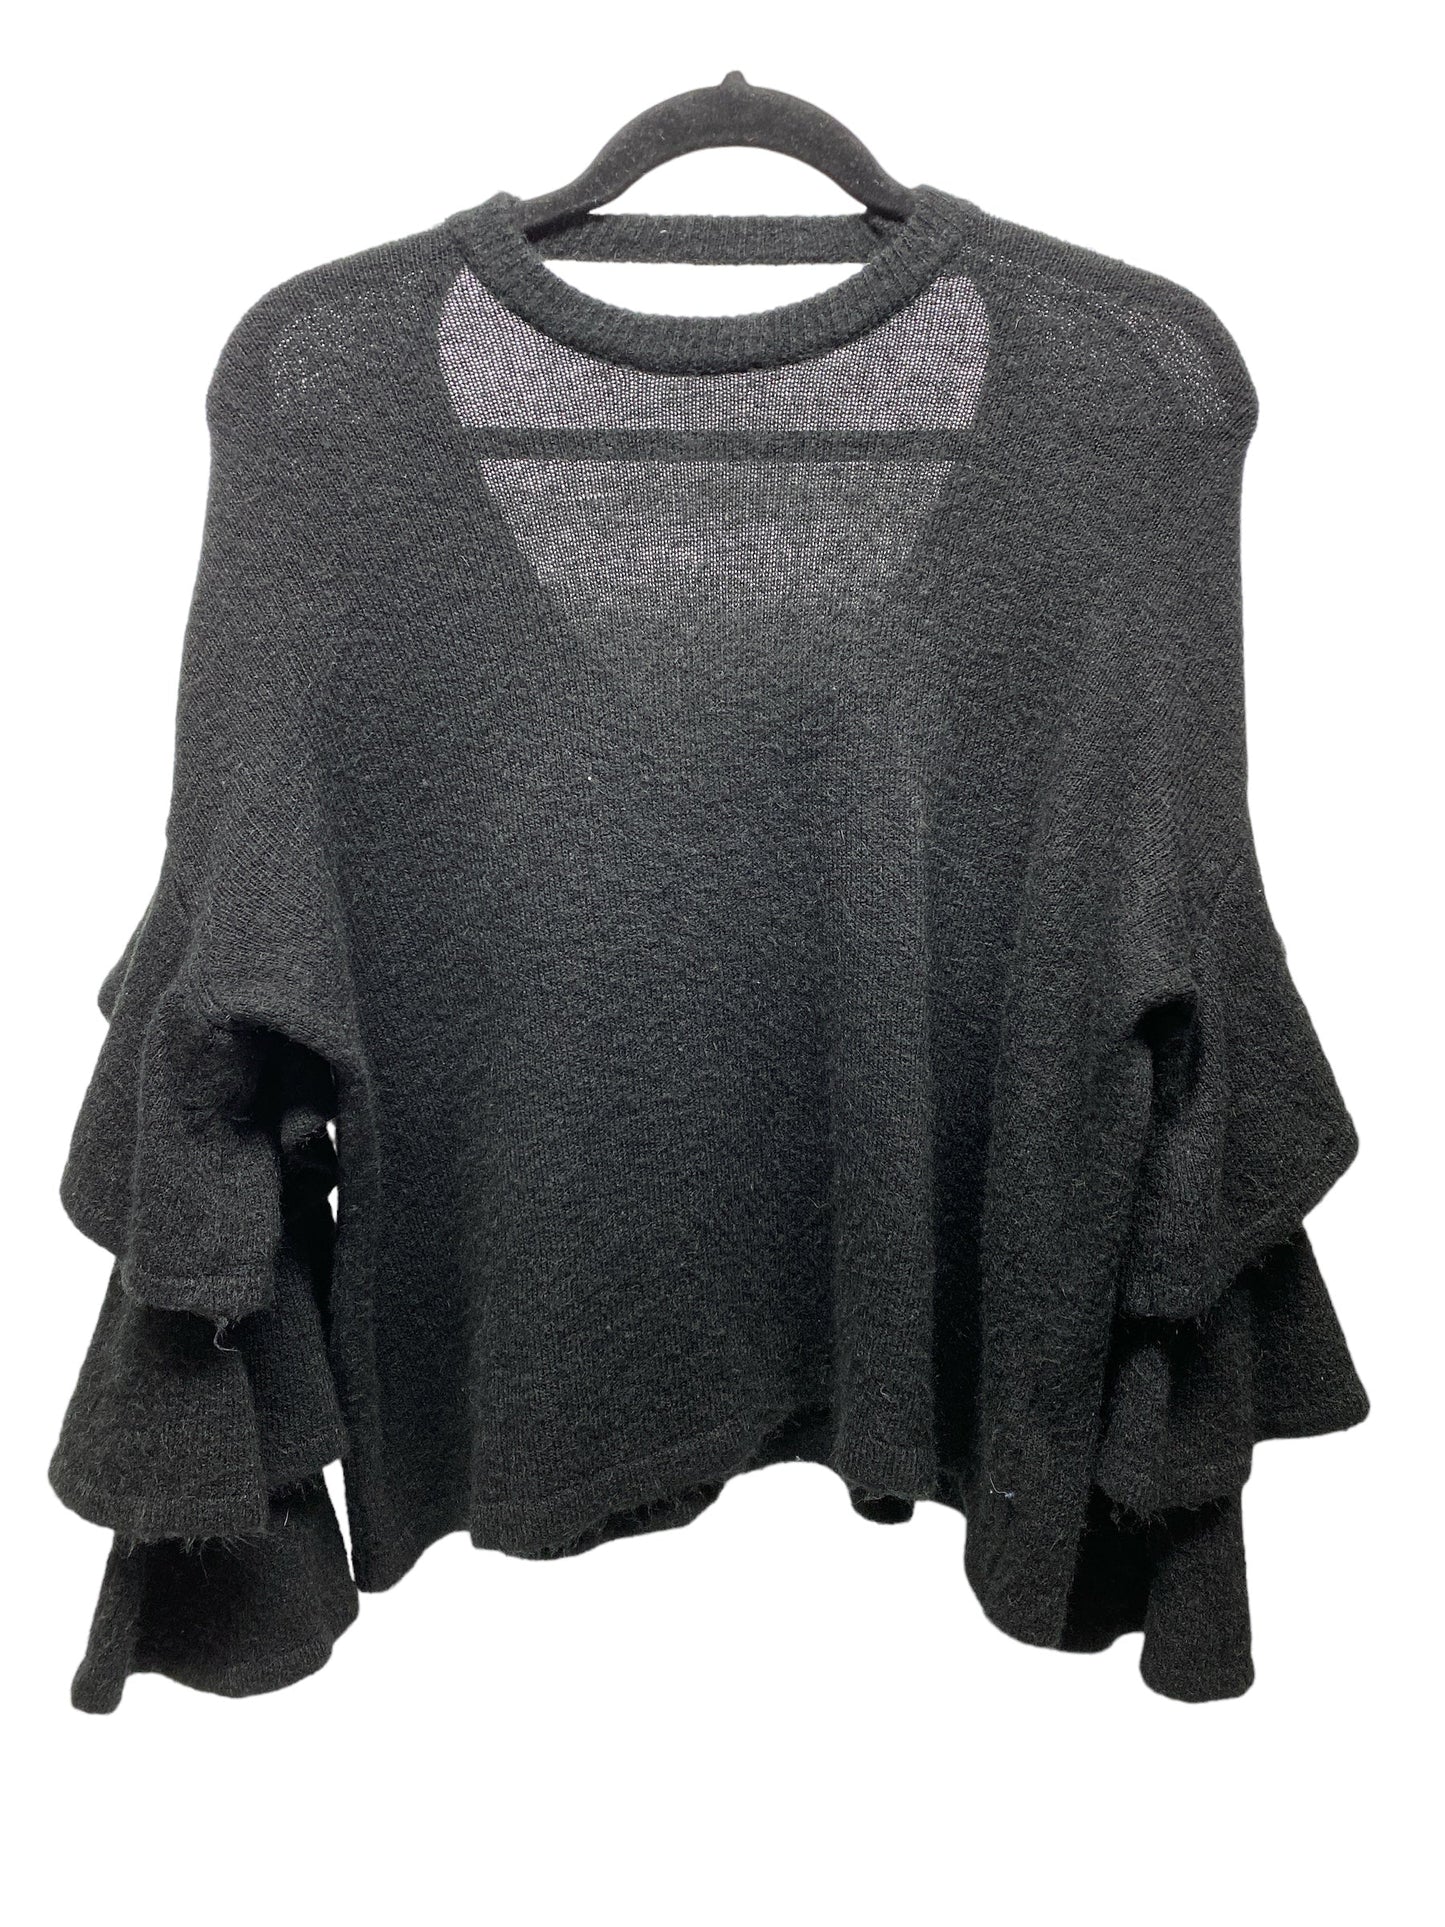 Sweater By Olivaceous  Size: M